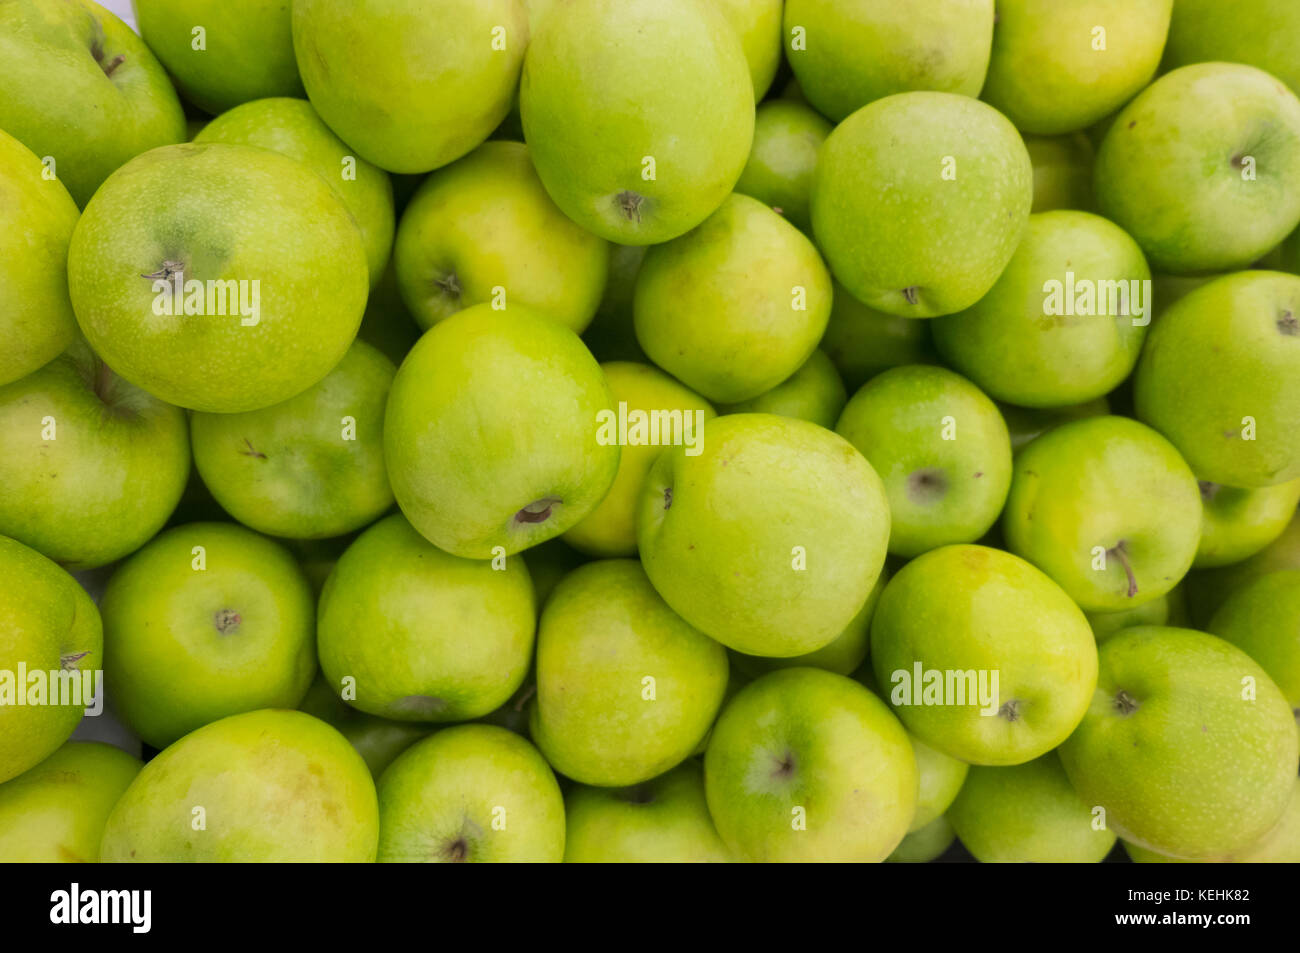 Pile of green apples Stock Photo